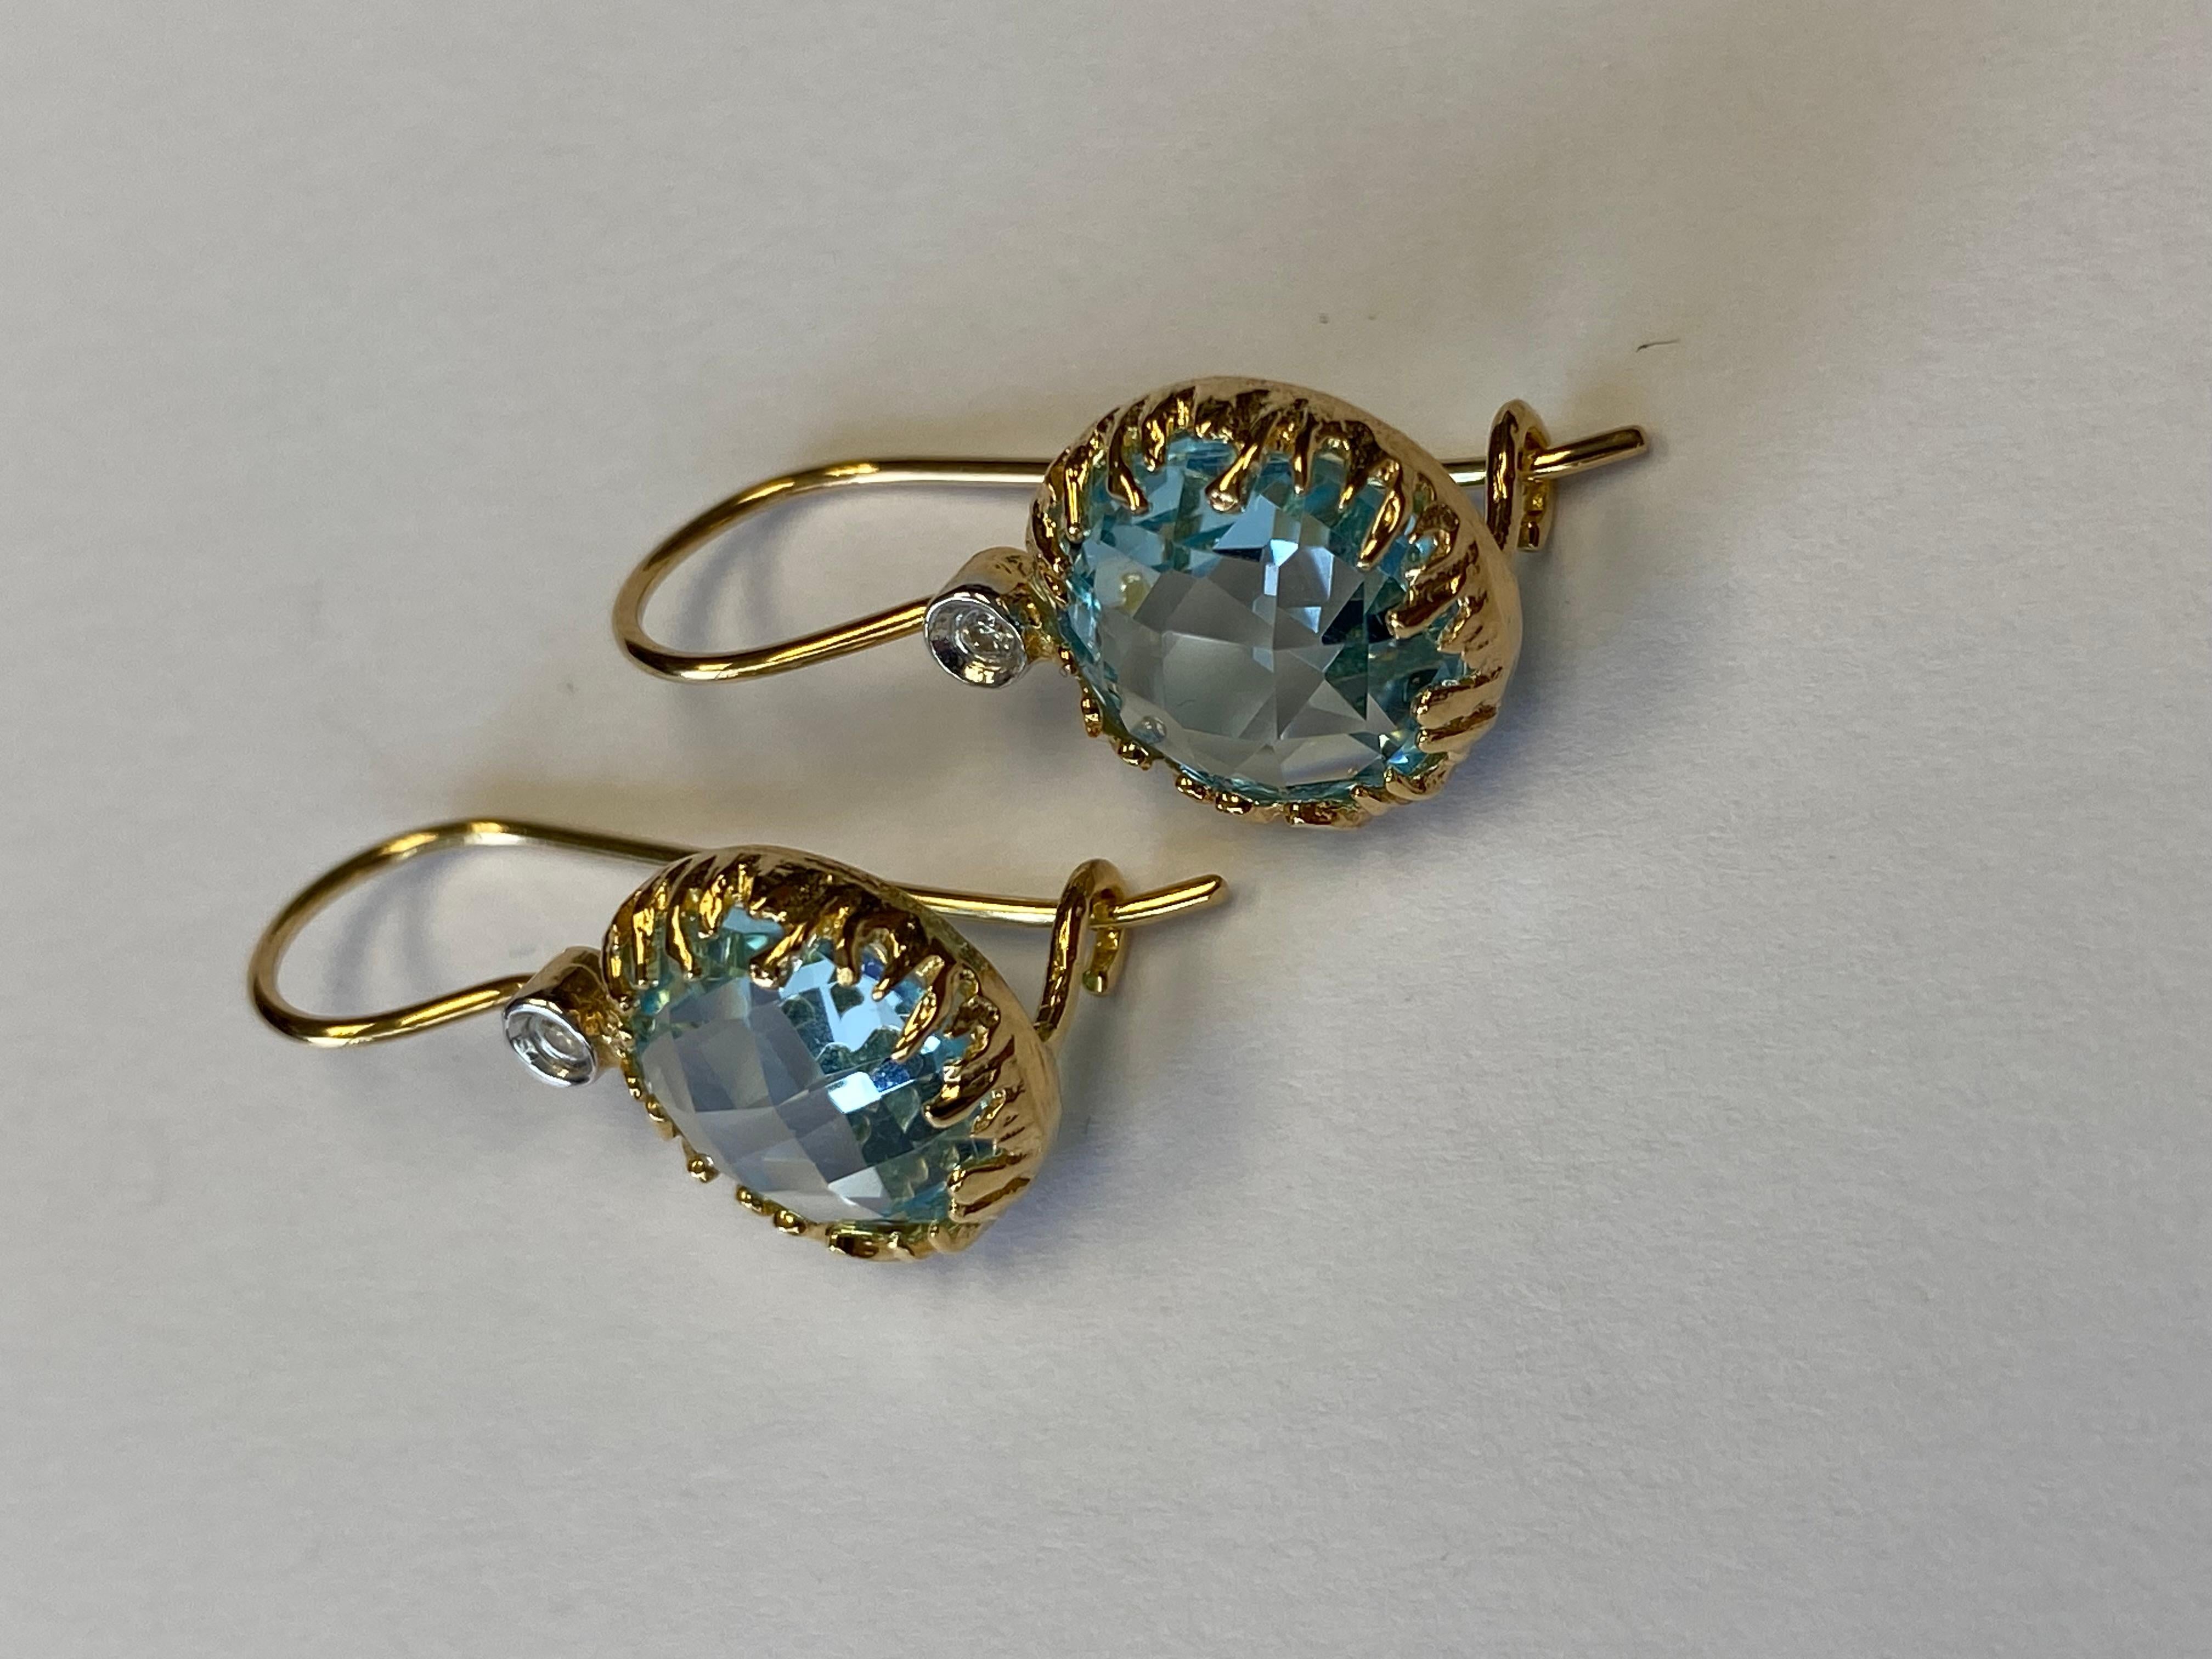 14 Karat Yellow Gold Hand-Crafted Polish-Finished Drop Earrings, Centered with a 10mm 8.5CT Round Checkerboard-Cut Semi-Precious Blue Topaz Color Stone, Accented with 0.03 Carats of Bezel Set Diamonds on a Kidney Wire Back Finding
